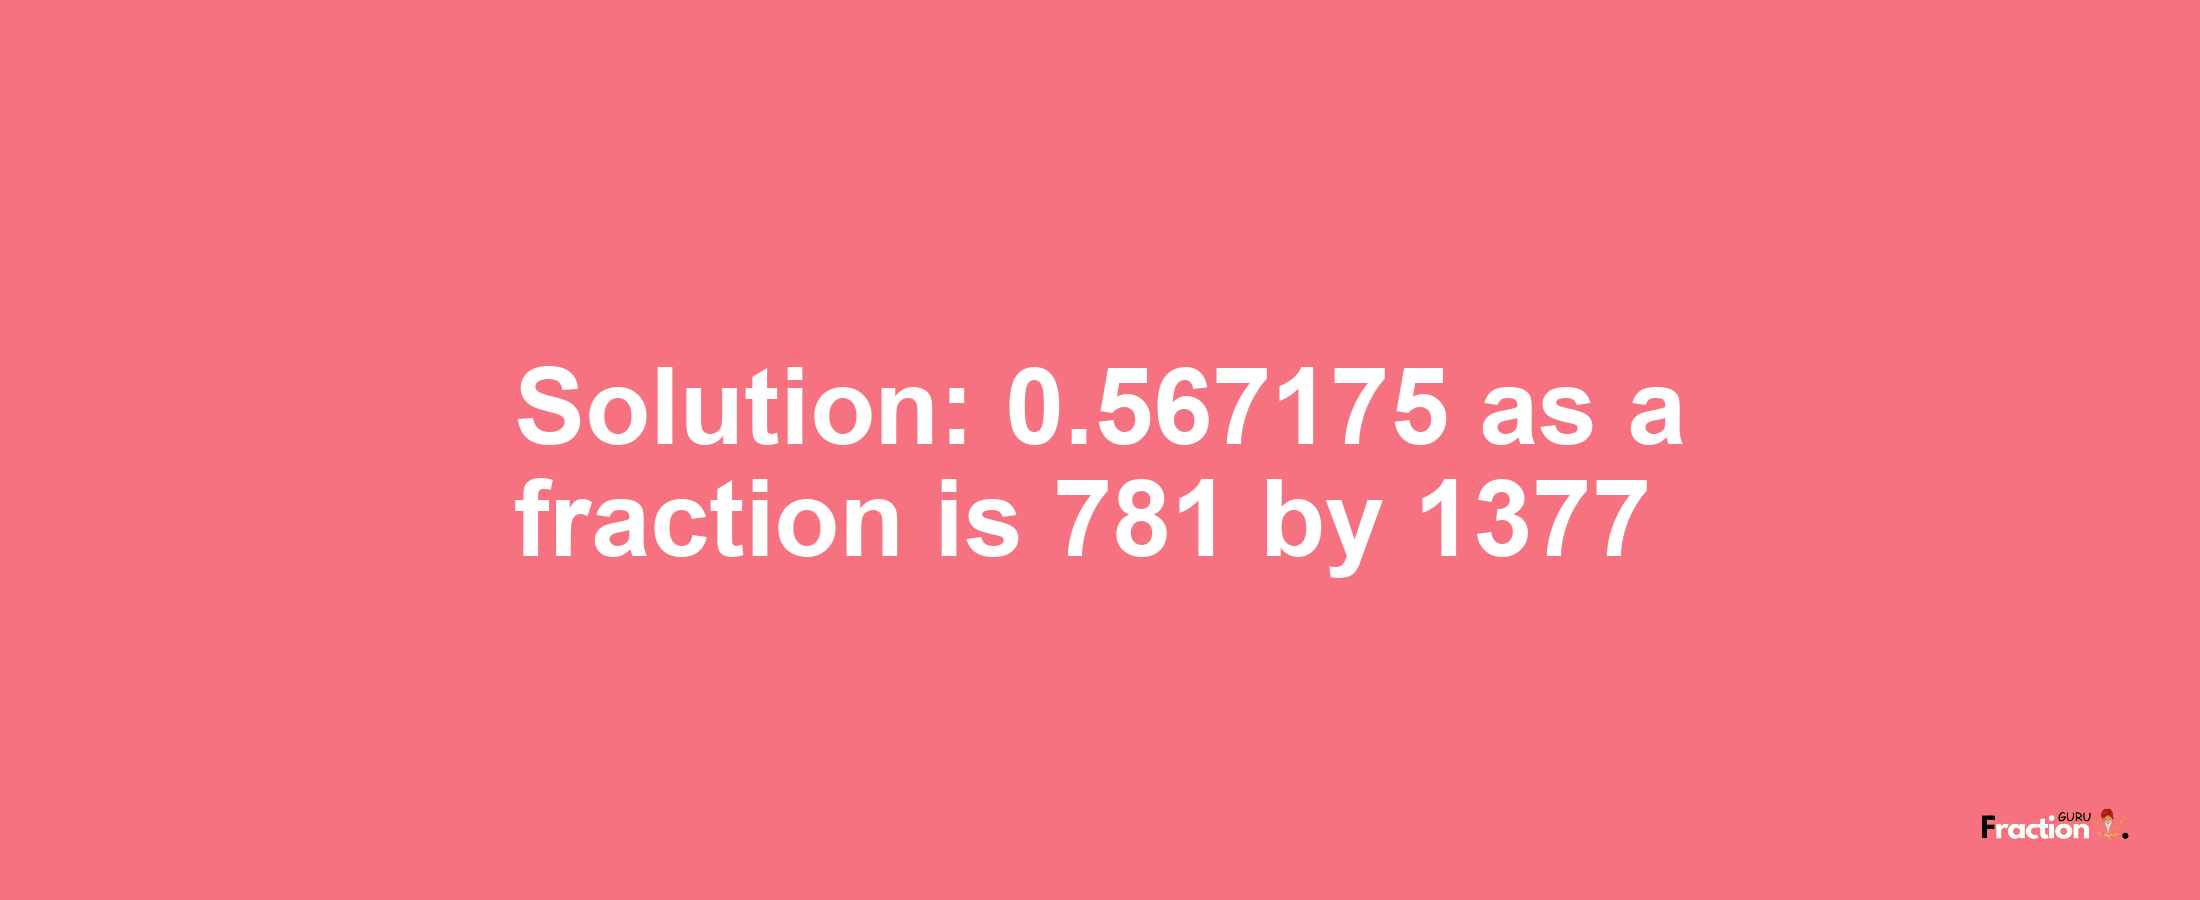 Solution:0.567175 as a fraction is 781/1377